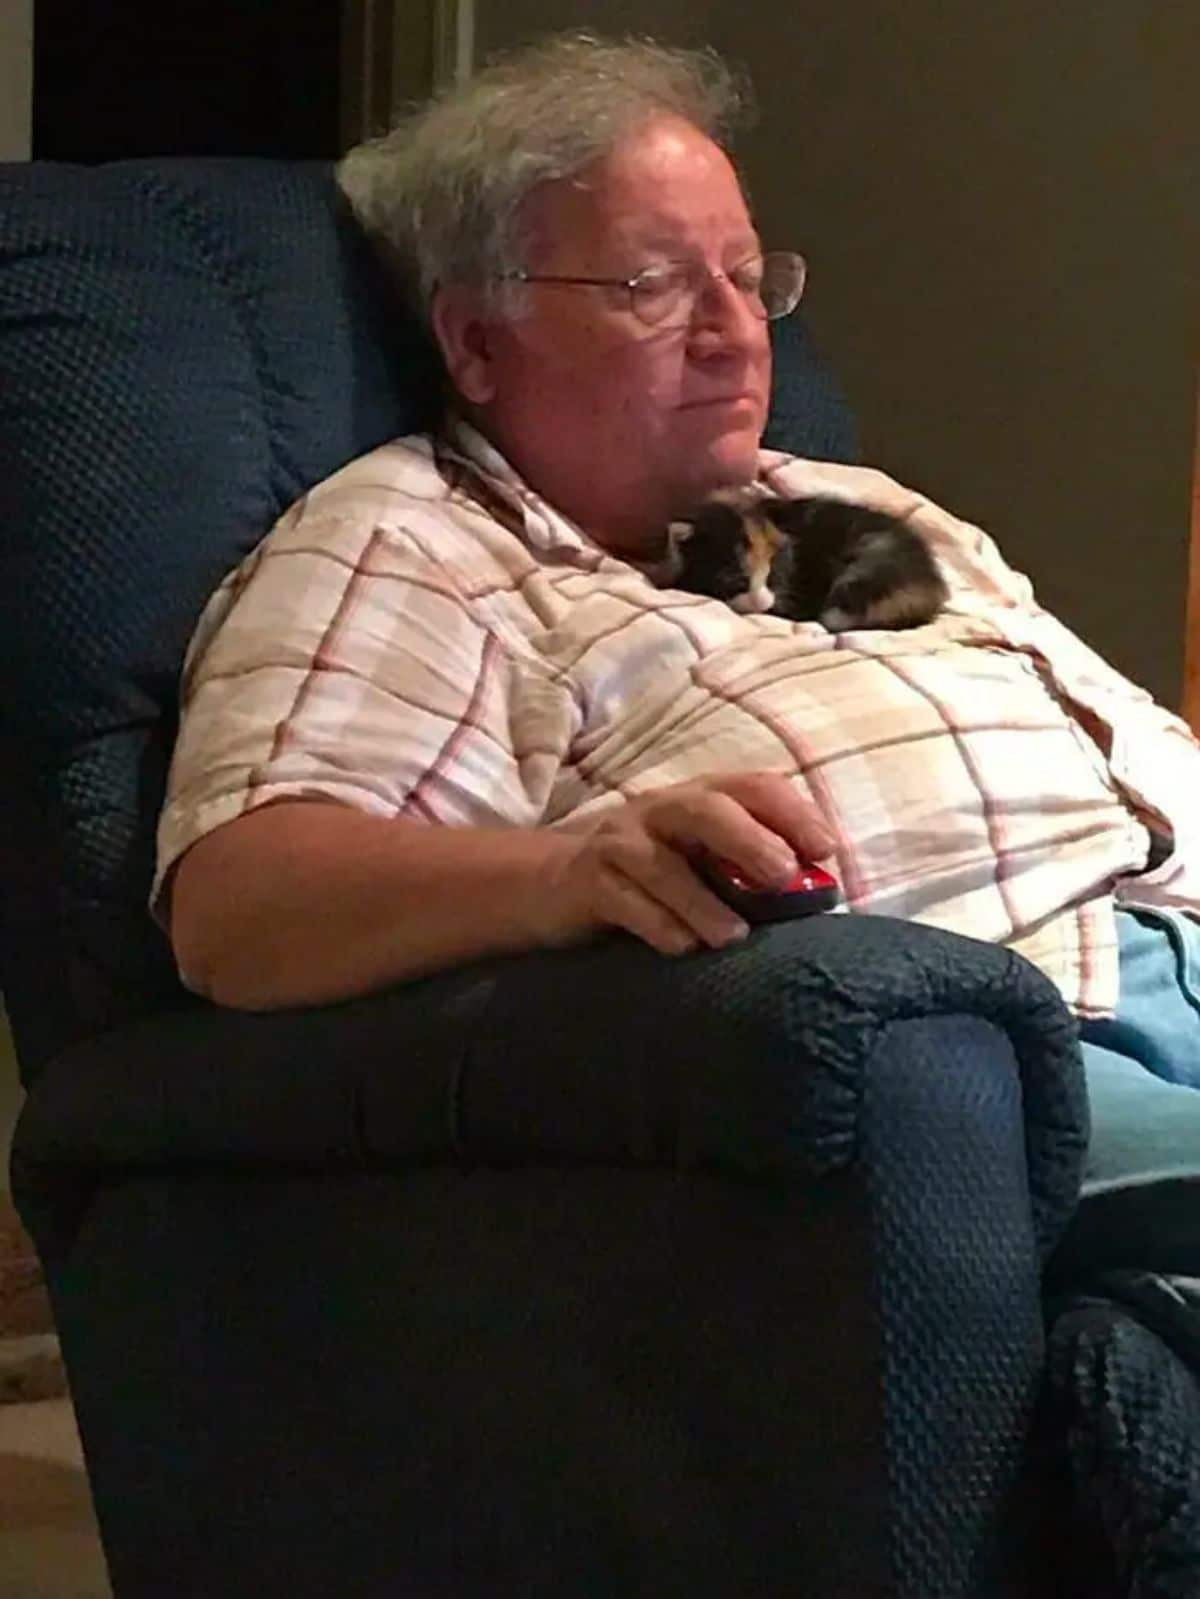 orange black and white kitten sleeping on an old man's chest while the man is sitting up on a black chair